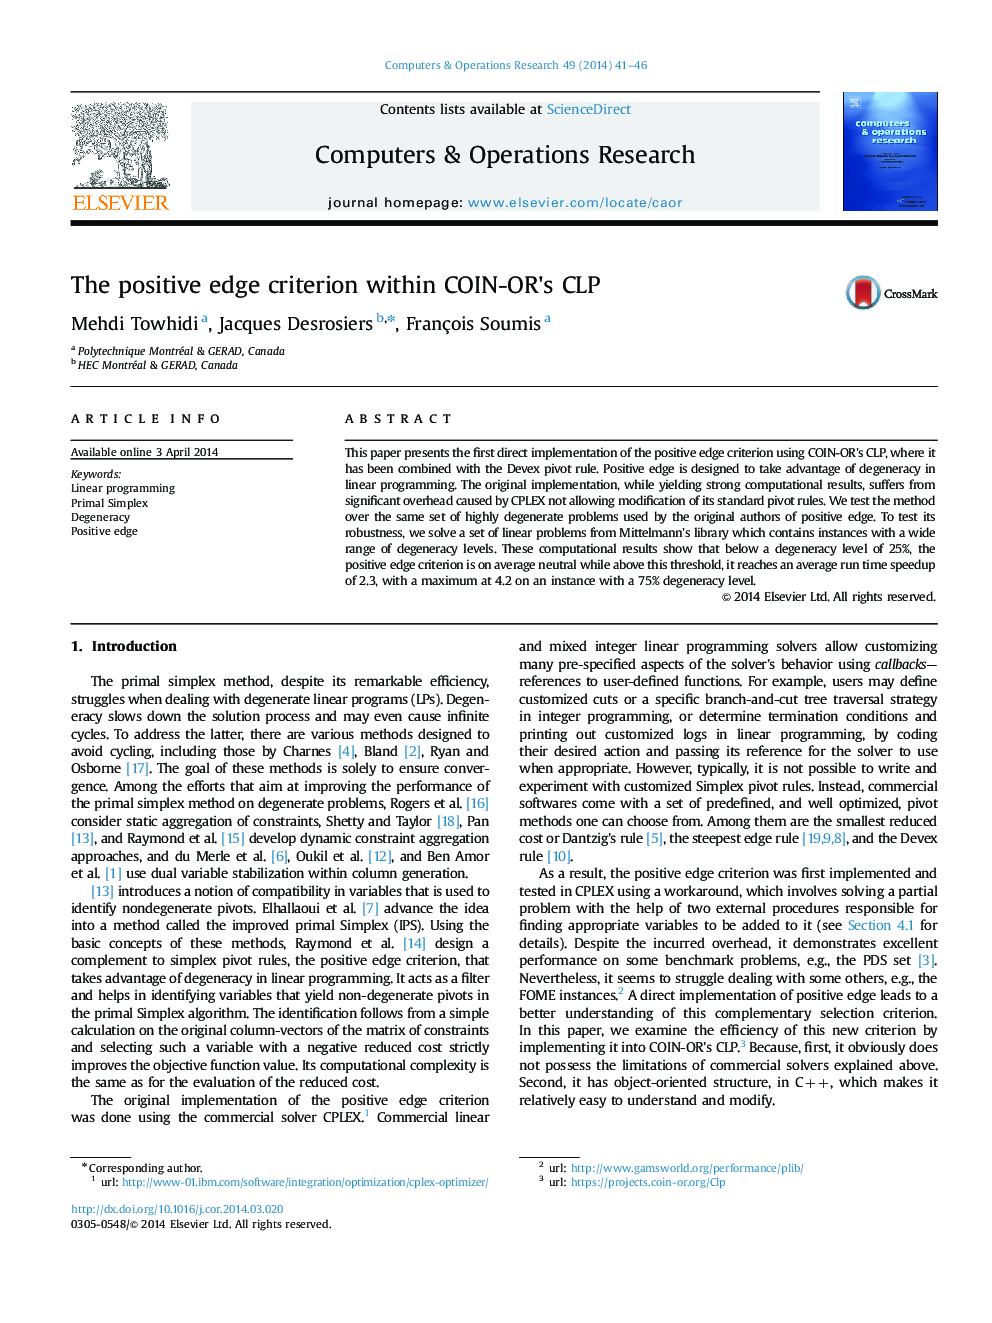 The positive edge criterion within COIN-OR׳s CLP